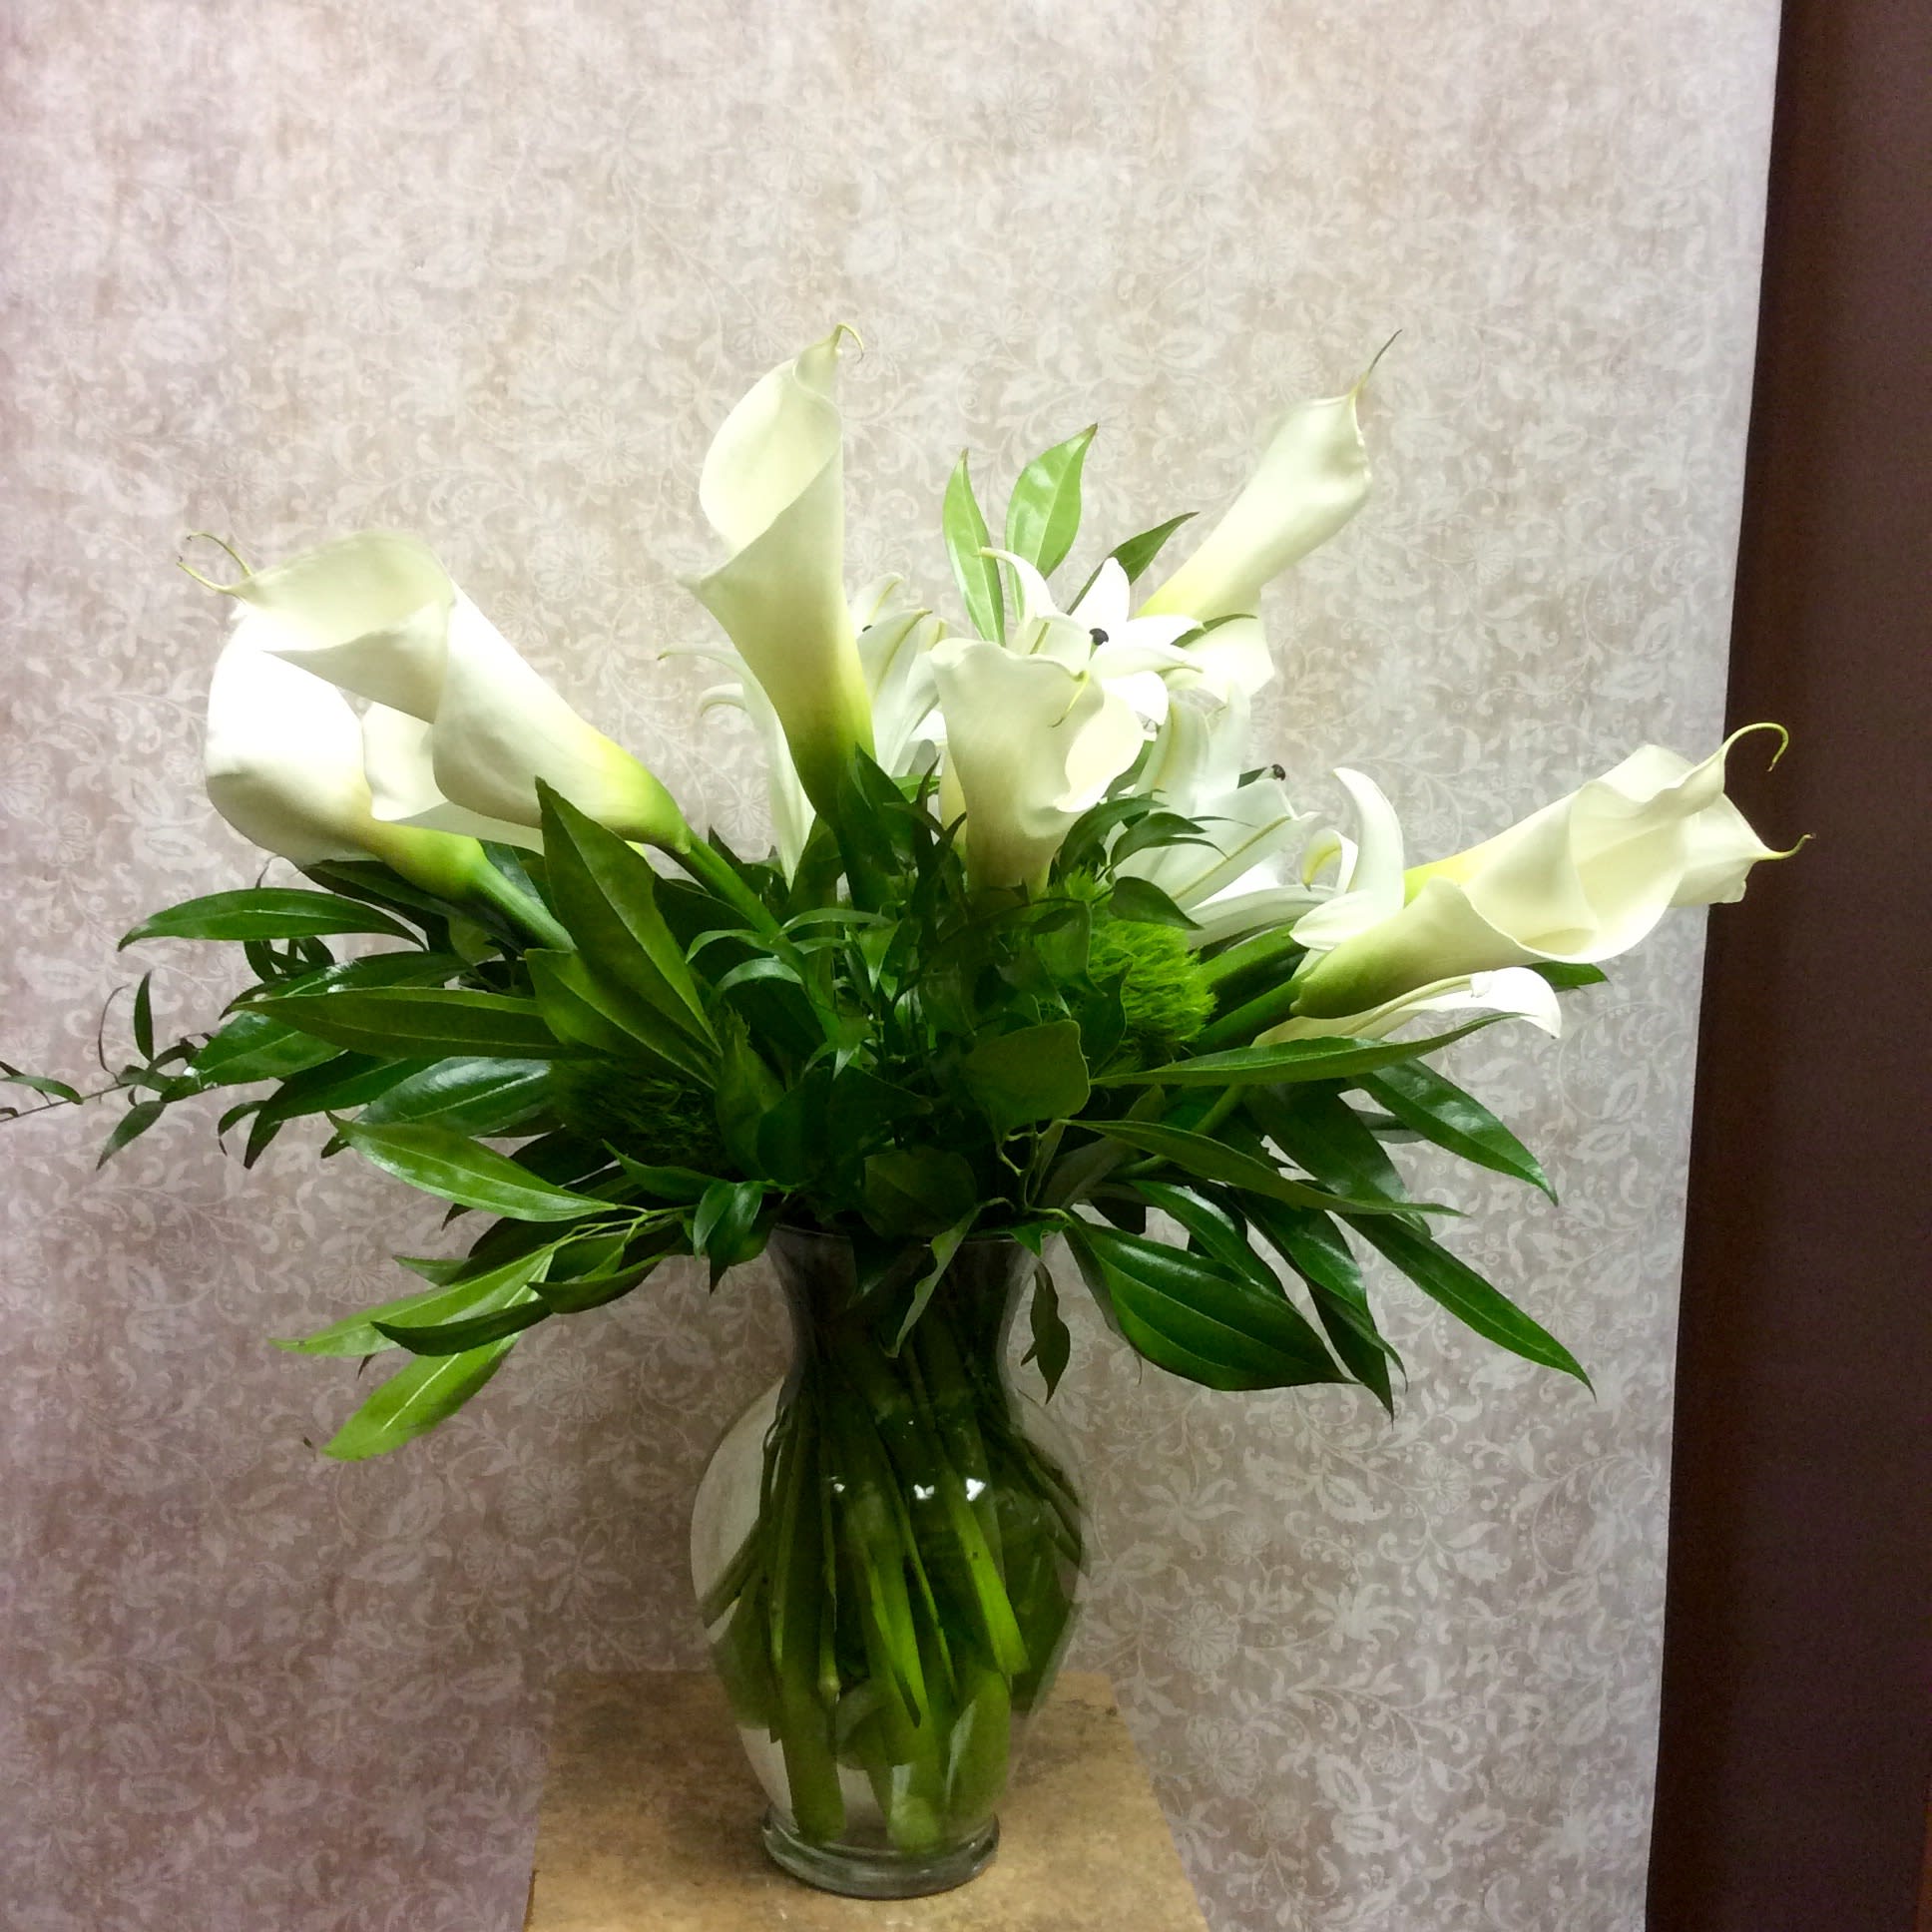 Quiet serenity - Clear glass vase arrangement of white callas and white lilies highlighted with tropical foliage